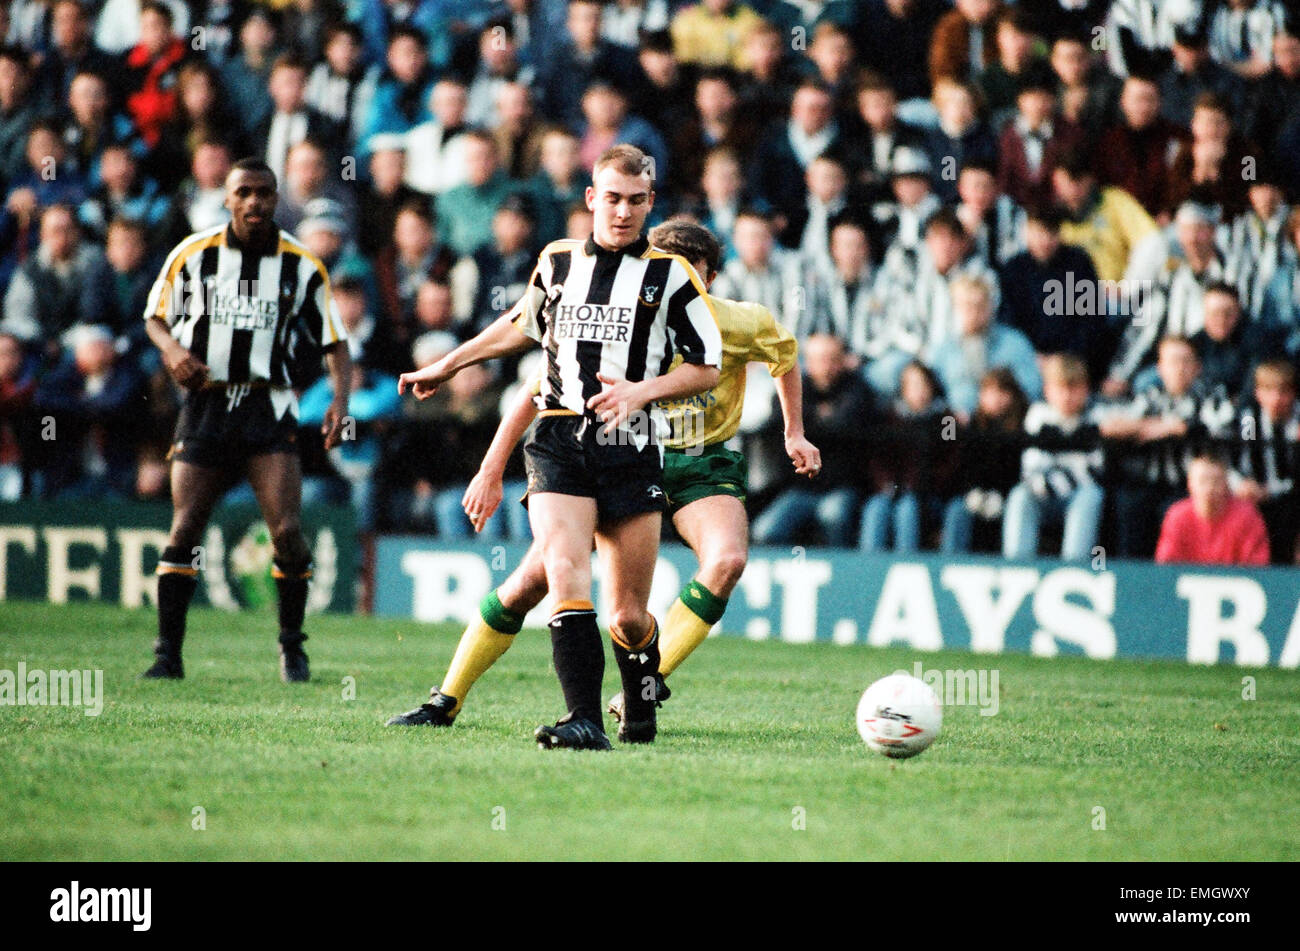 Championship League match at Meadow Lane. Notts County 0 v Newcastle United 2. Action form the match. 5th December 1992. Stock Photo